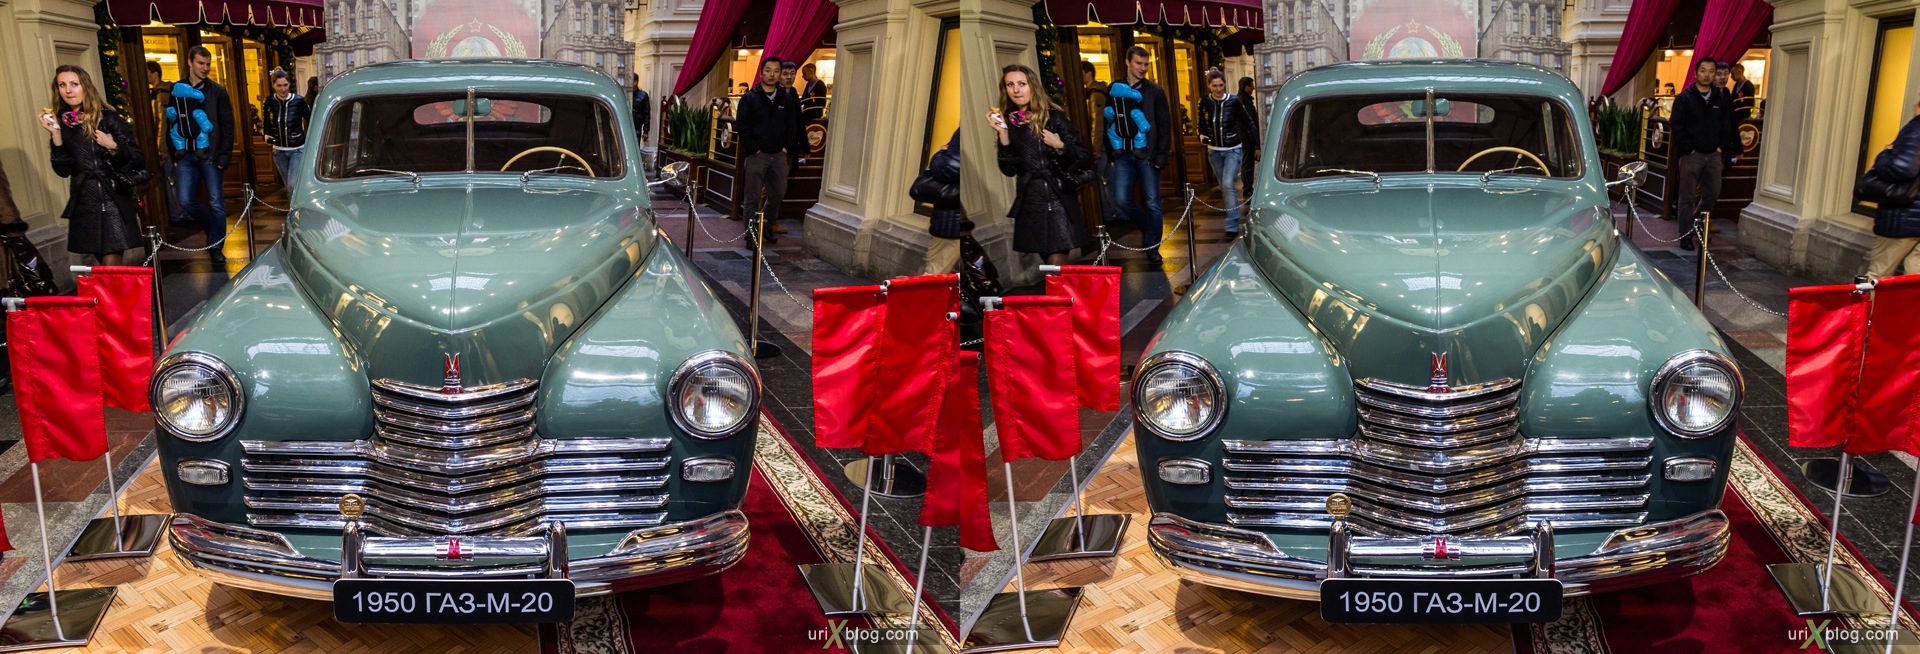 2013, Moscow, Russia, GAZ-M-20, GUM, old, automobile, vehicle, exhibition, shop, mall, 3D, stereo pair, cross-eyed, crossview, cross view stereo pair, stereoscopic